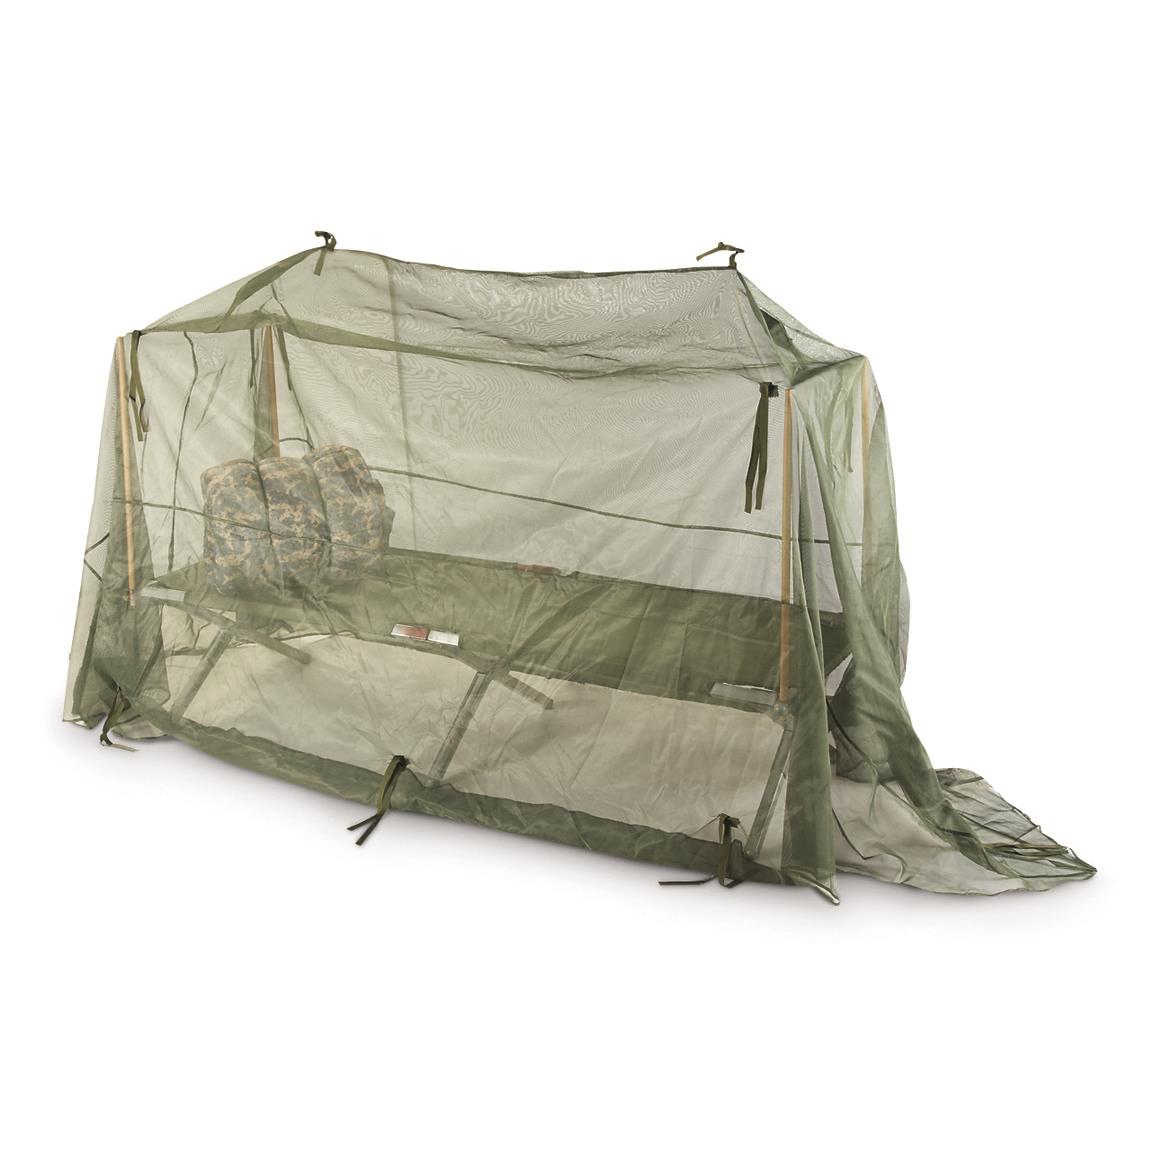 U.S. Military Surplus Mosquito Netting without Poles